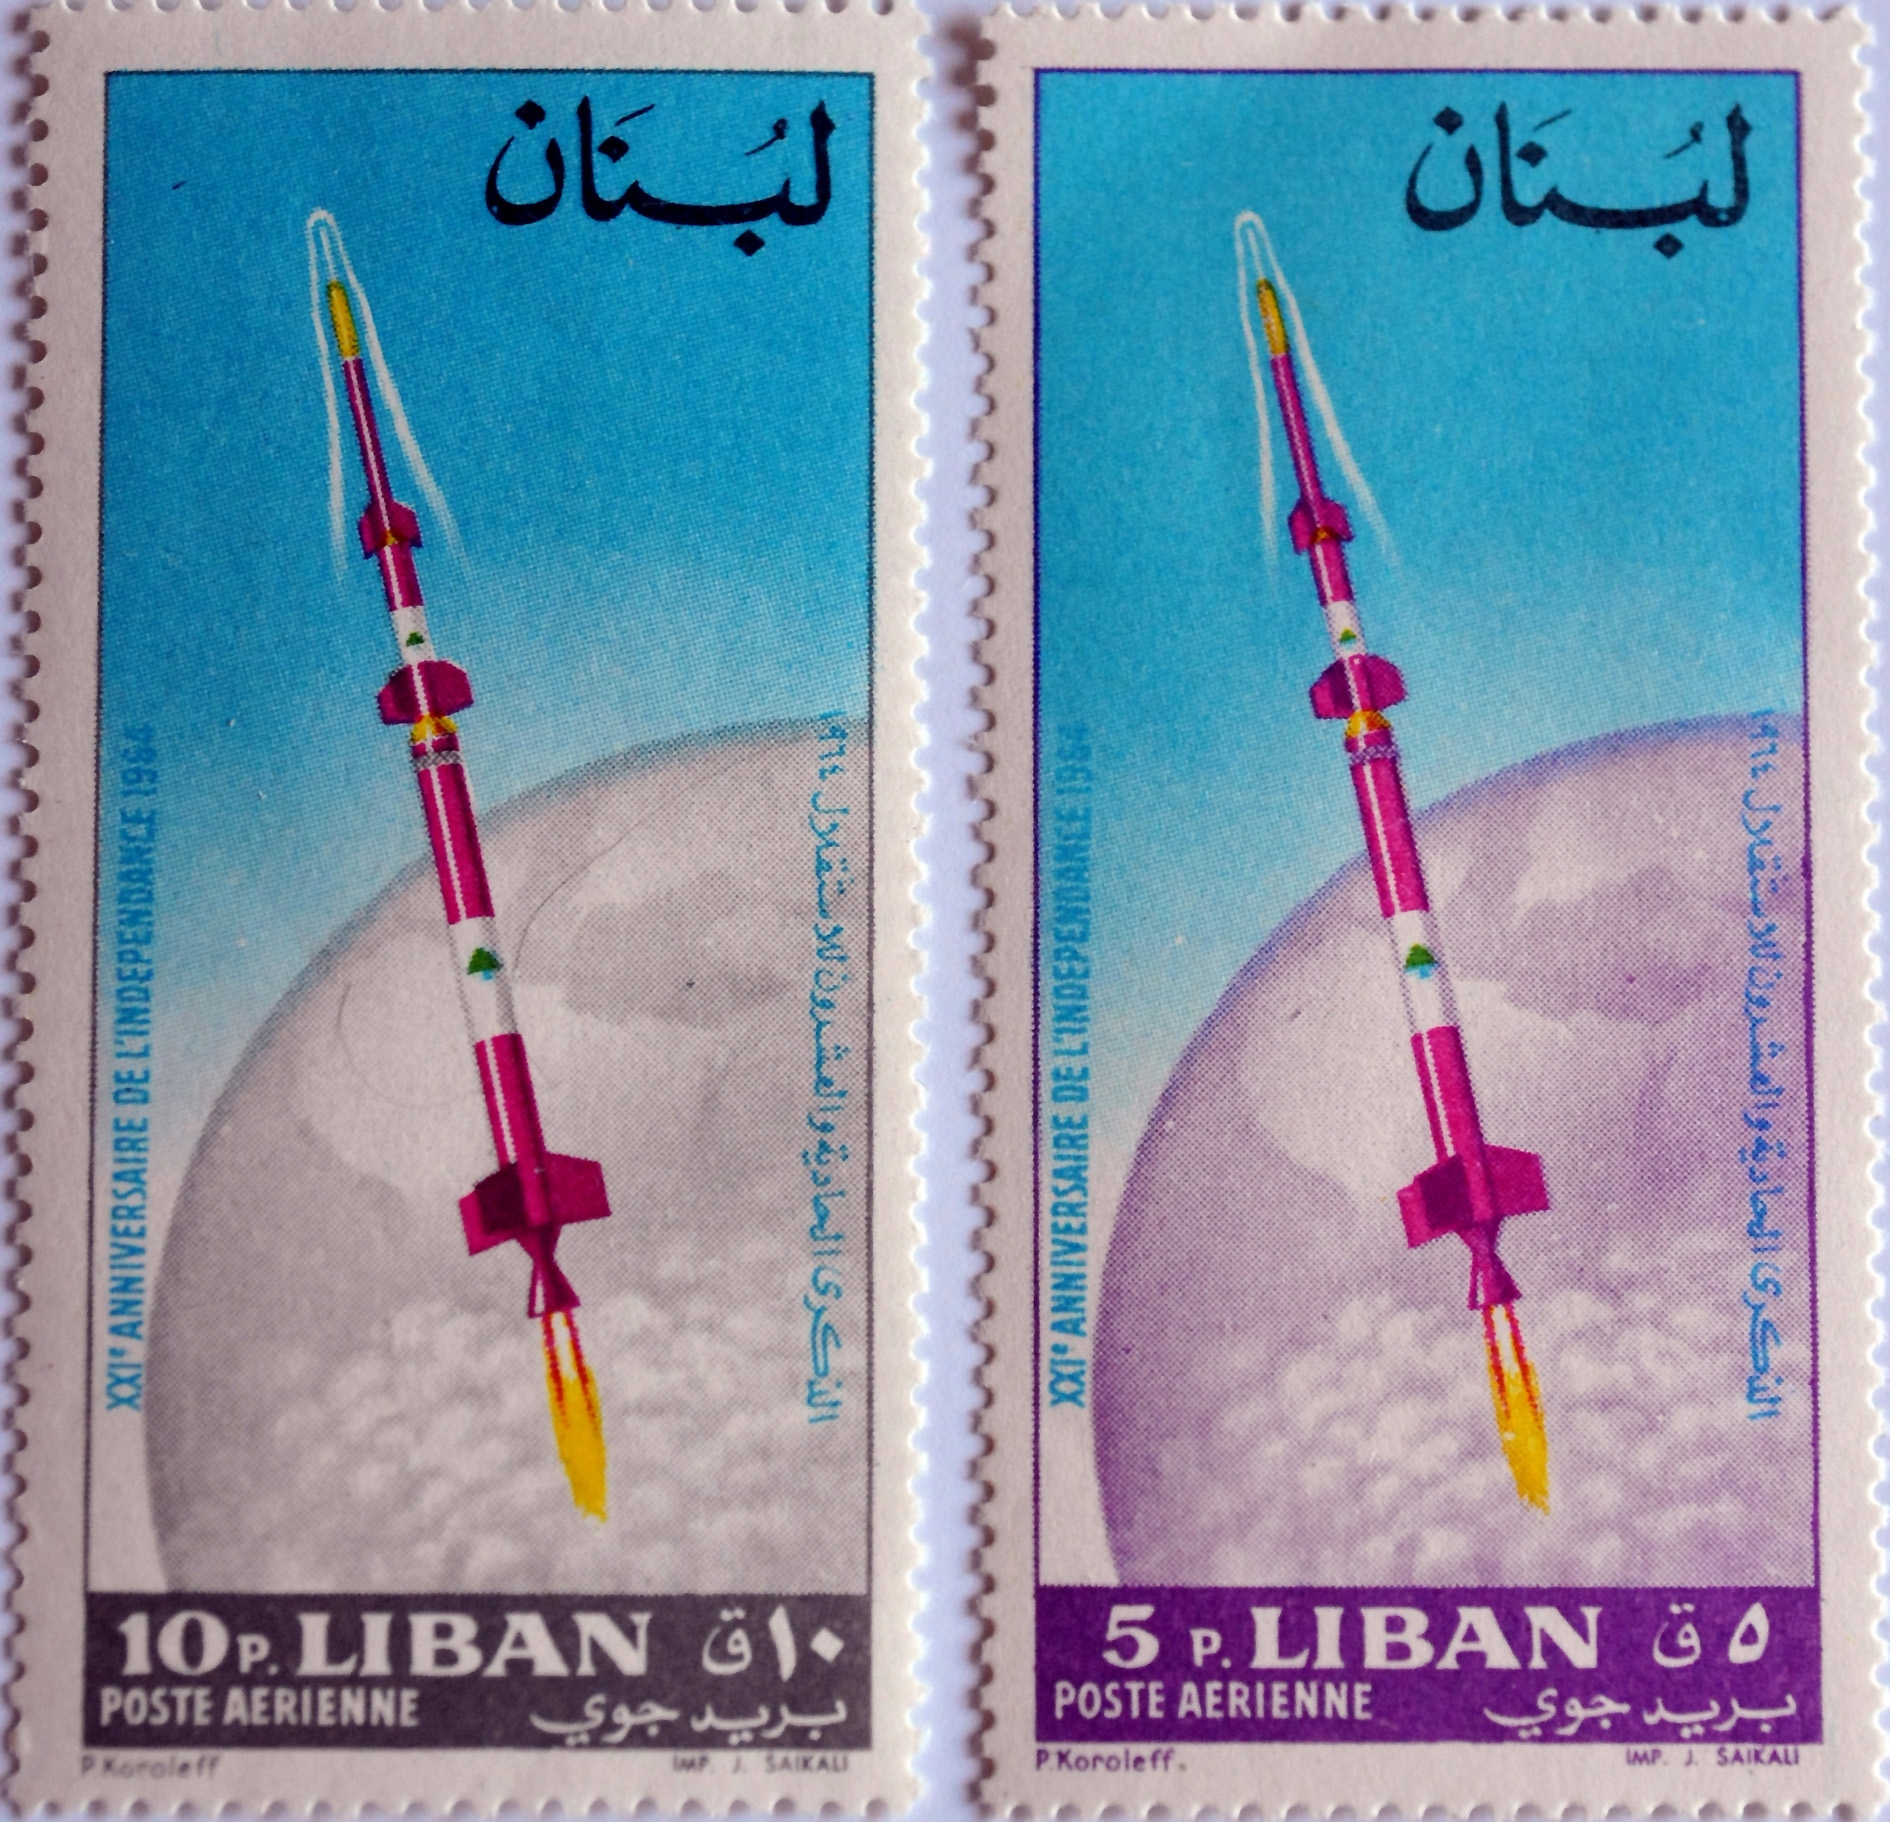 Image du film The Lebanese Rocket Society 6036c097-594c-46a5-9162-a219bfd108d2